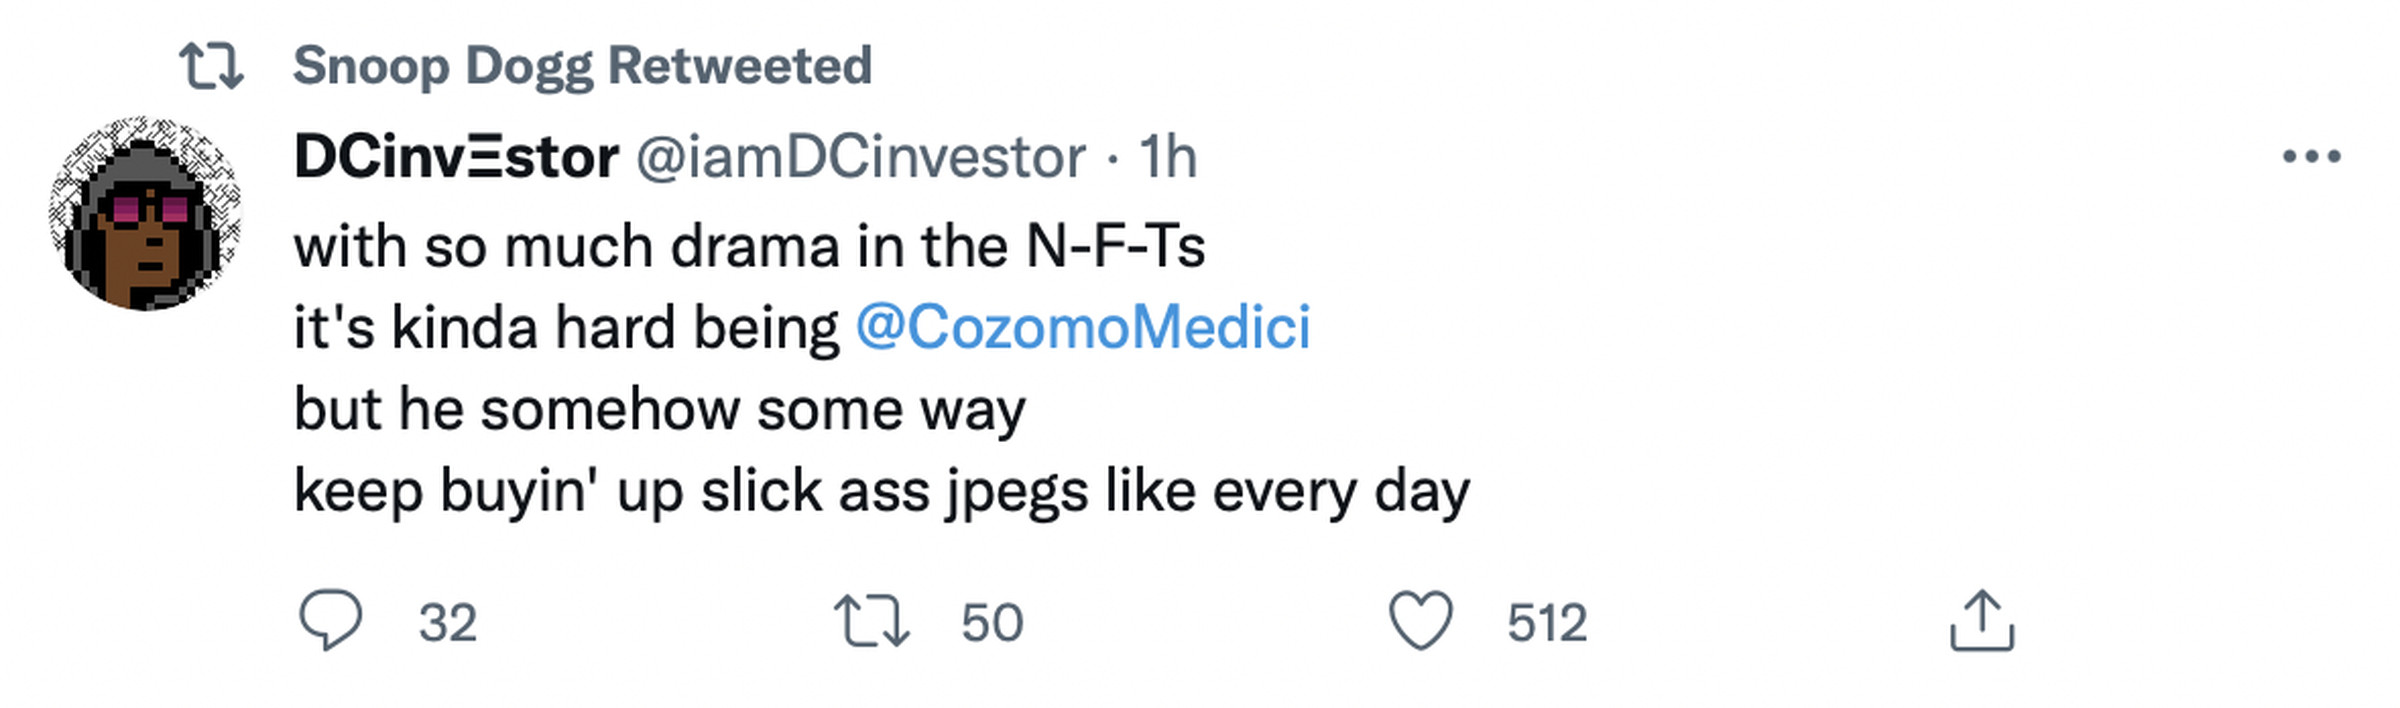 Tweet retweeted by Snoop Dogg reading: “with so much drama in the N-F-Ts it’s kinda hard being @CozomoMedici   but he somehow some way keep buyin’ up slick ass jpegs like every day”